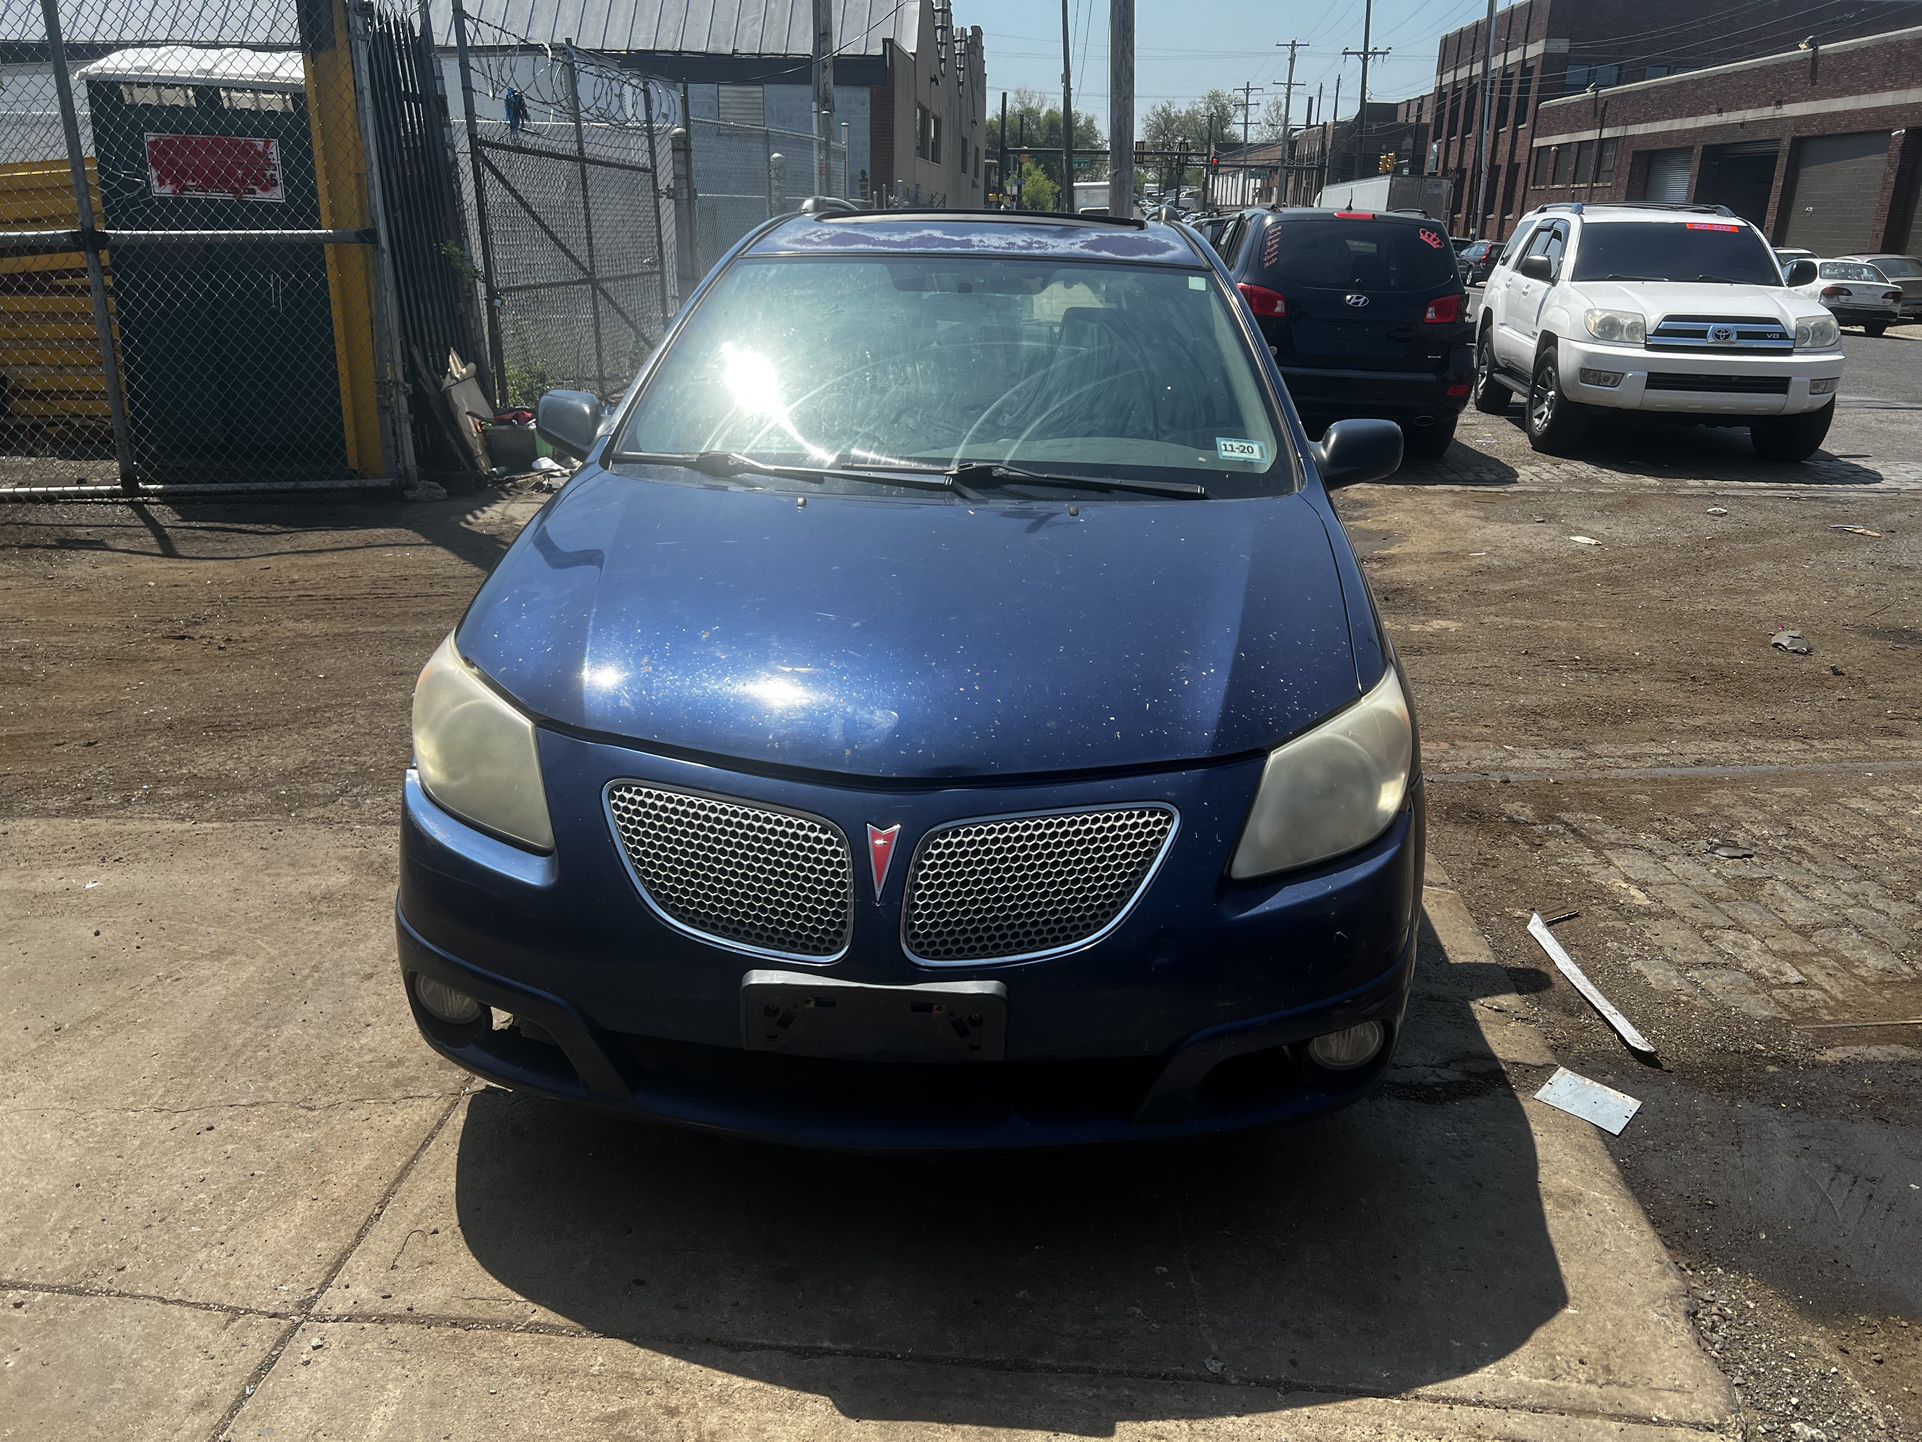 2005 PONTIAC VIBE (PARTS ONLY)